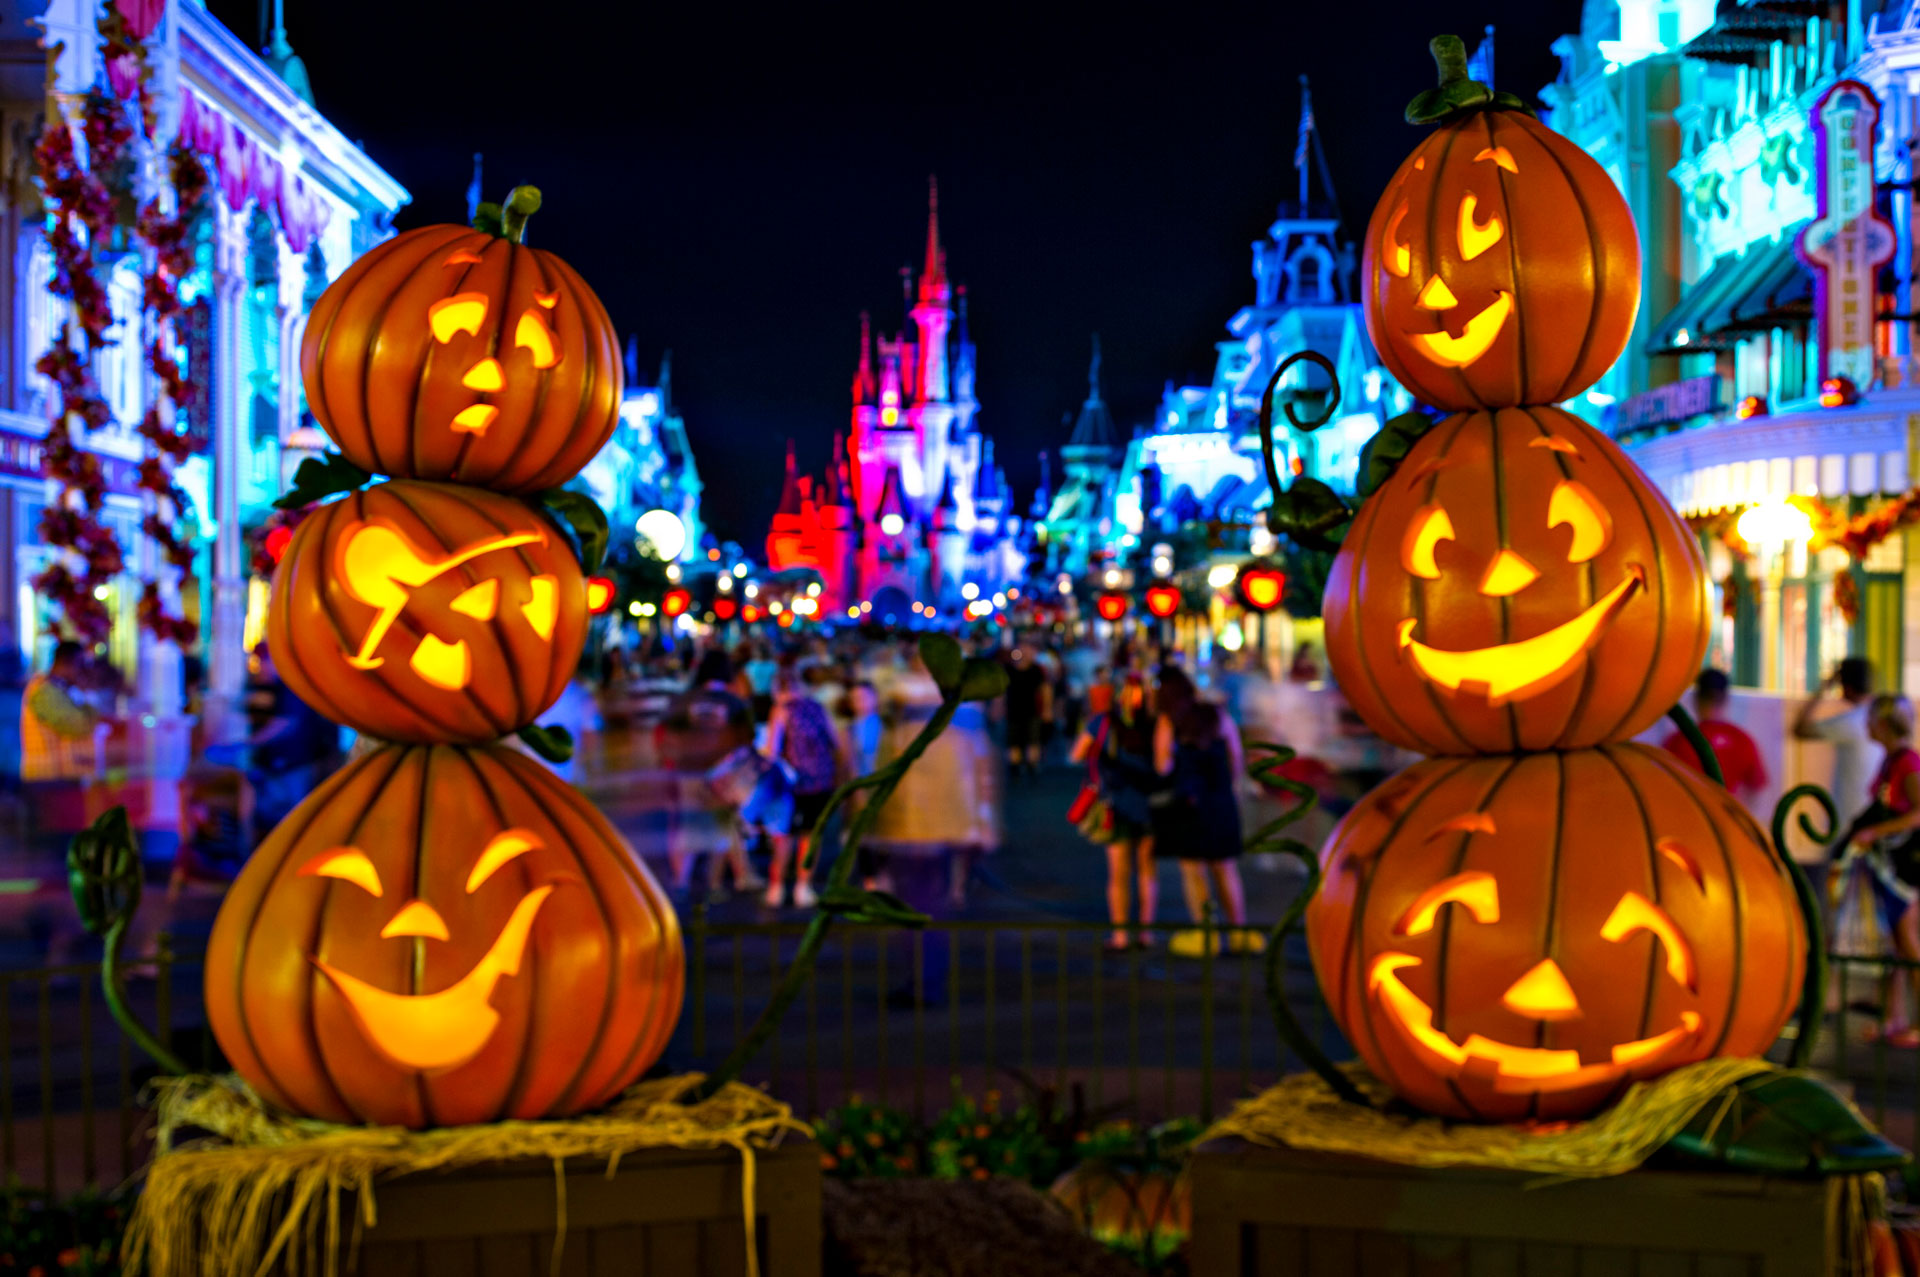 Two sets of 3-tiered glowing Halloween pumpkins with faces featuring the Cinderella Castle and Main Street U.S.A. in the distance (glowing in colors of purple, red, blue, and soft green) for Mickey's Not-So-Scary Halloween Party at the Magic Kingdom® Park. Nighttime shot. Lake Buena Vista, Florida.